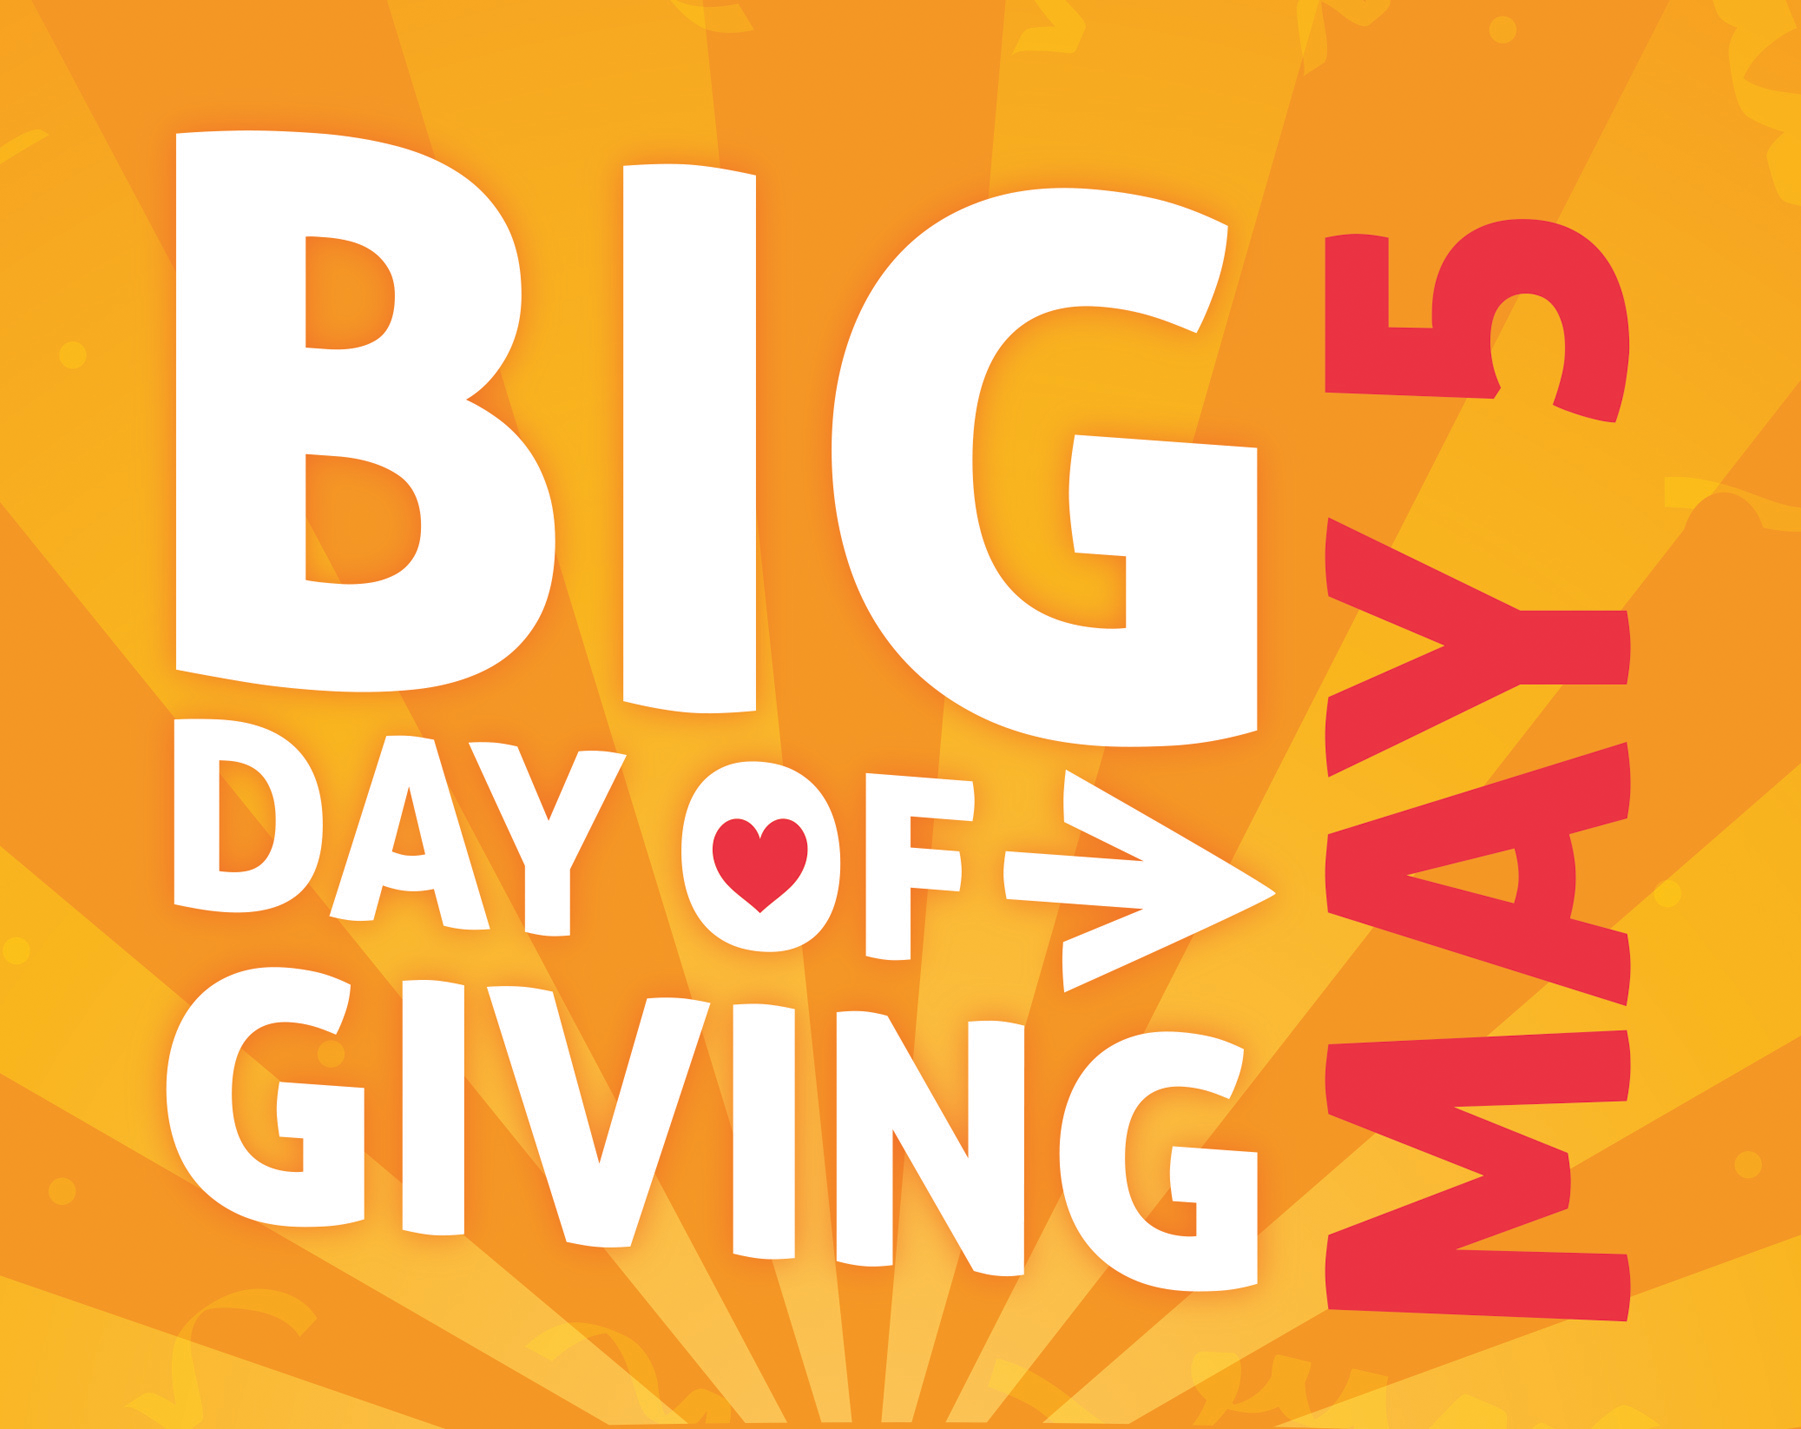 Big Day of Giving aims to raise 5 million for local nonprofits